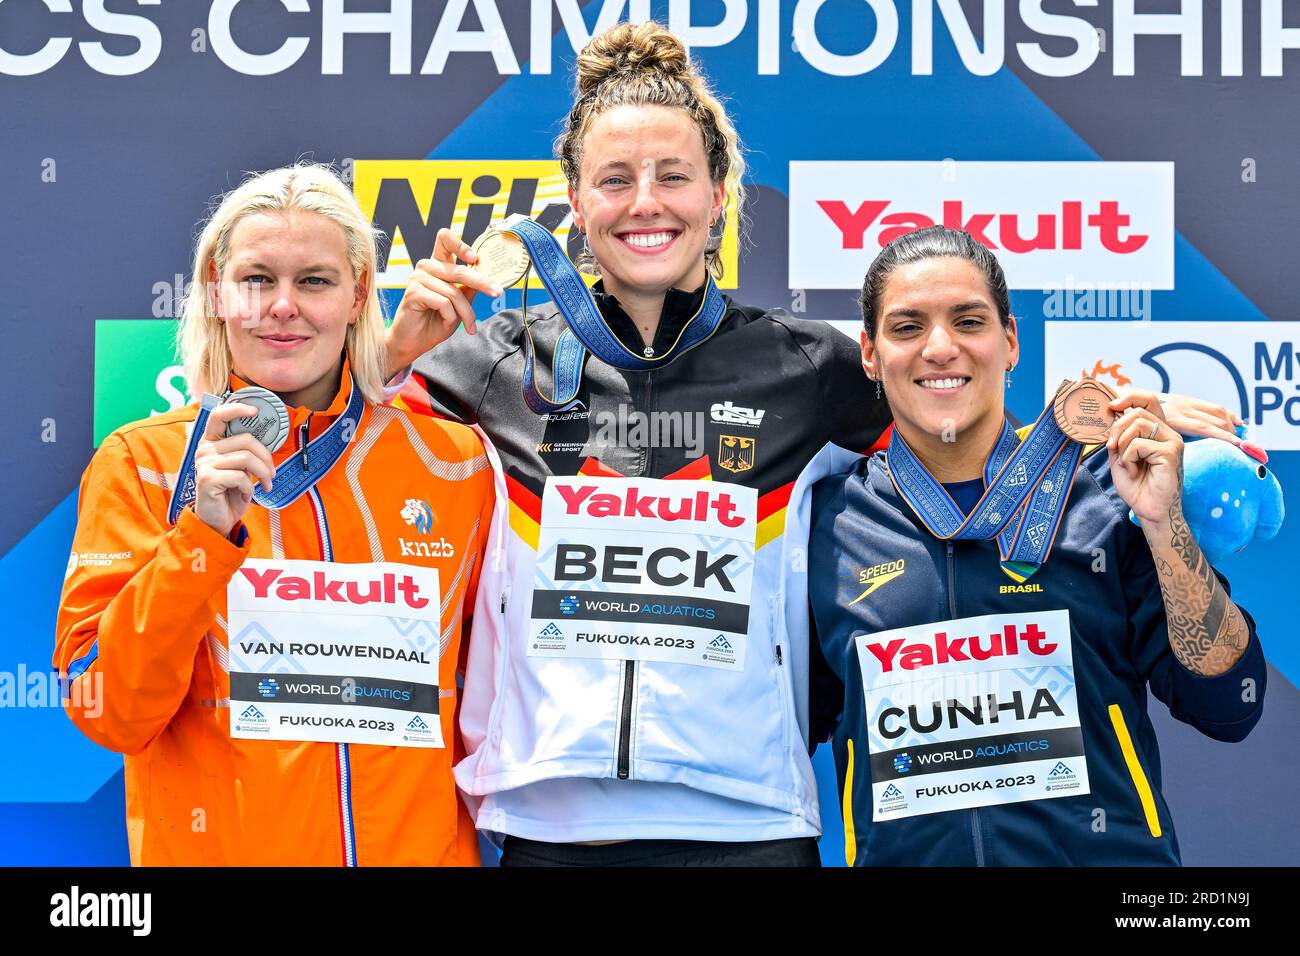 Fukuoka, Japan. 18th July, 2023. Sharon Van Rouwendaal of the Netherlands, silver, Leonie Beck of Germany, gold, Ana Marcela Cunha of Brasil, bronze show the medals after competing in the 5km Women during the 20th World Aquatics Championships at the Seaside Momochi Beach Park in Fukuoka (Japan), July 18th, 2023. Credit: Insidefoto di andrea staccioli/Alamy Live News Stock Photo